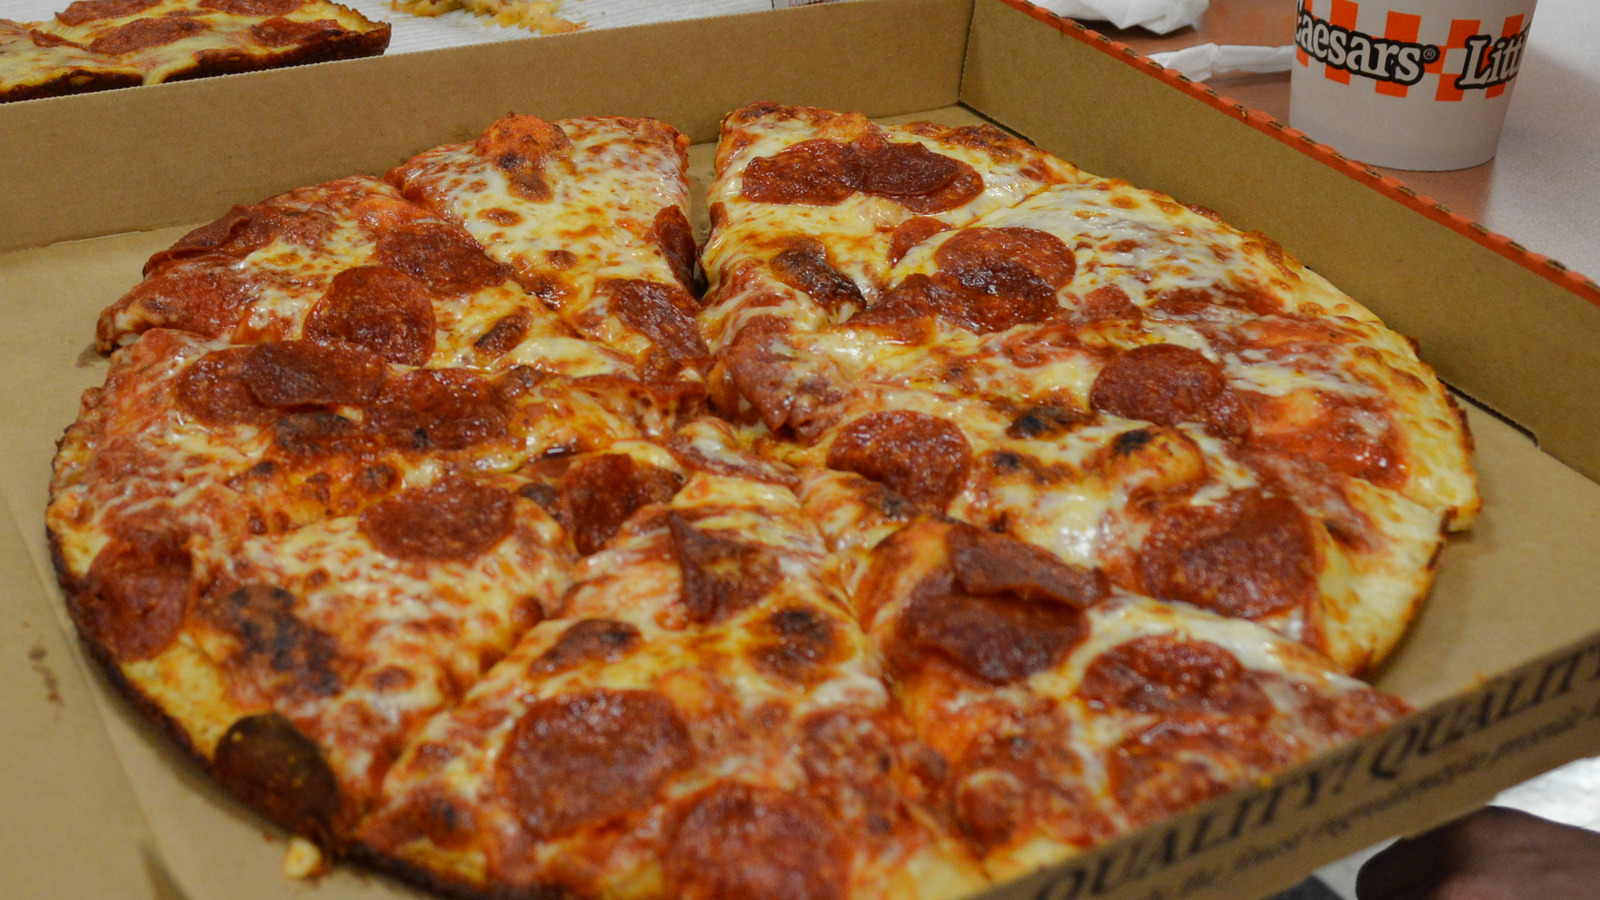 Little Caesars Pizza Delivery: Hot and Ready to Your Doorstep